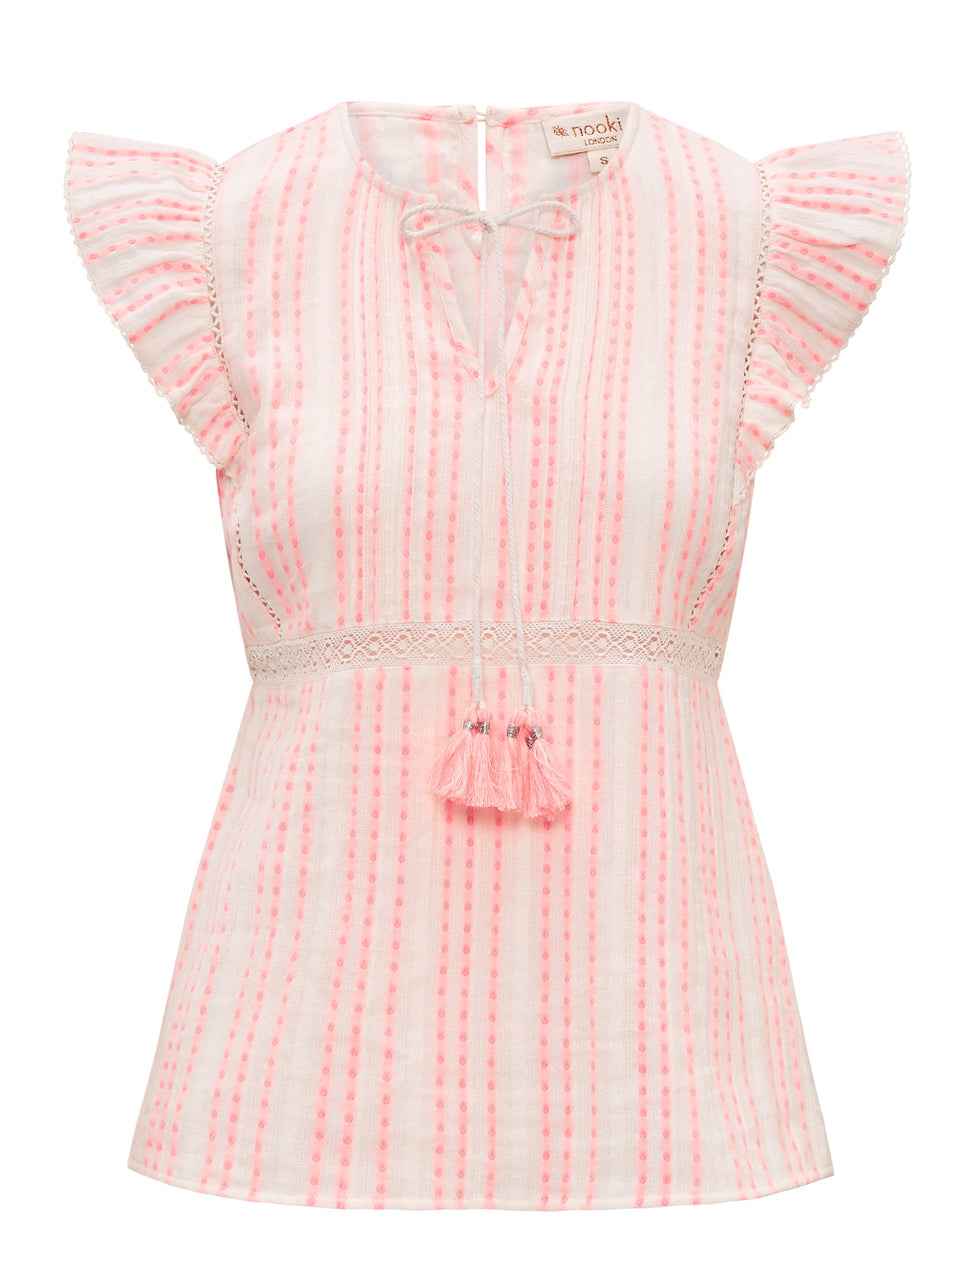 Nookie London ANYA FRILLY NEON PINK AND WHITE COTTON BLOUSE